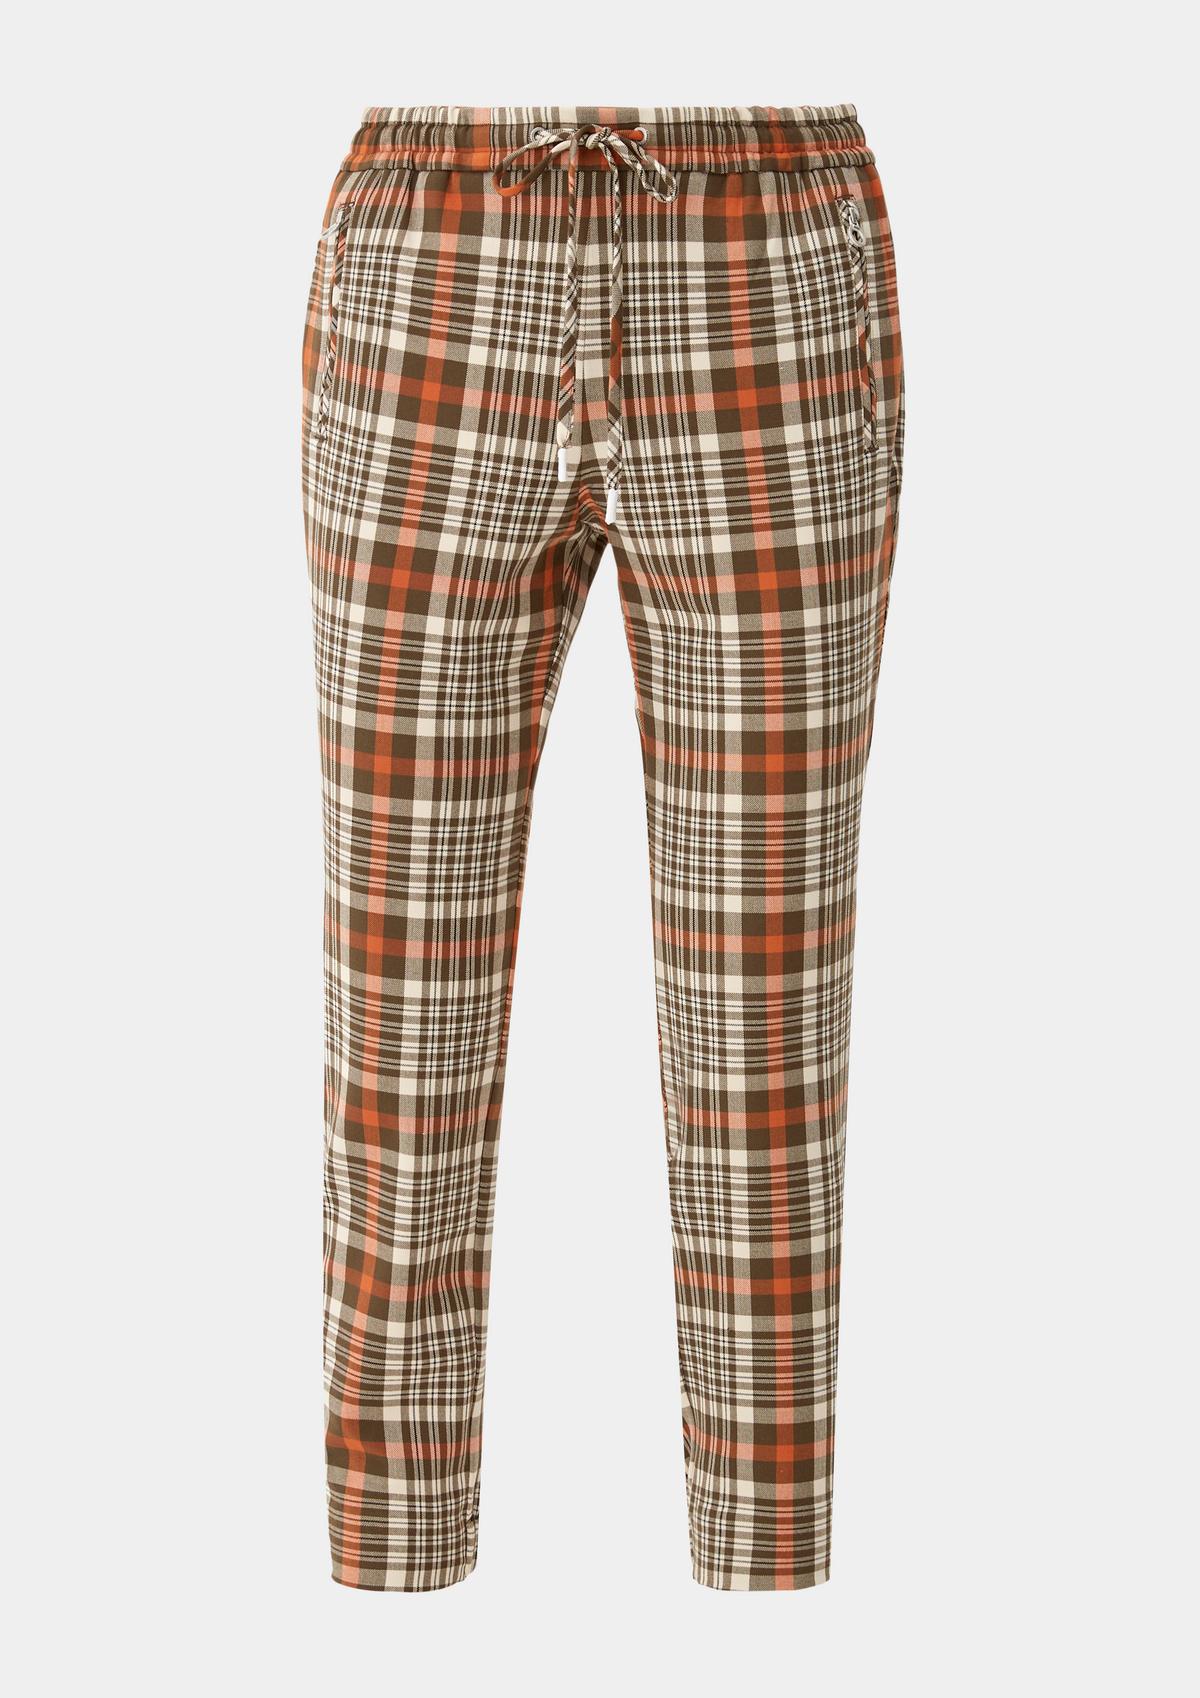 s.Oliver Tracksuit bottoms with a check pattern